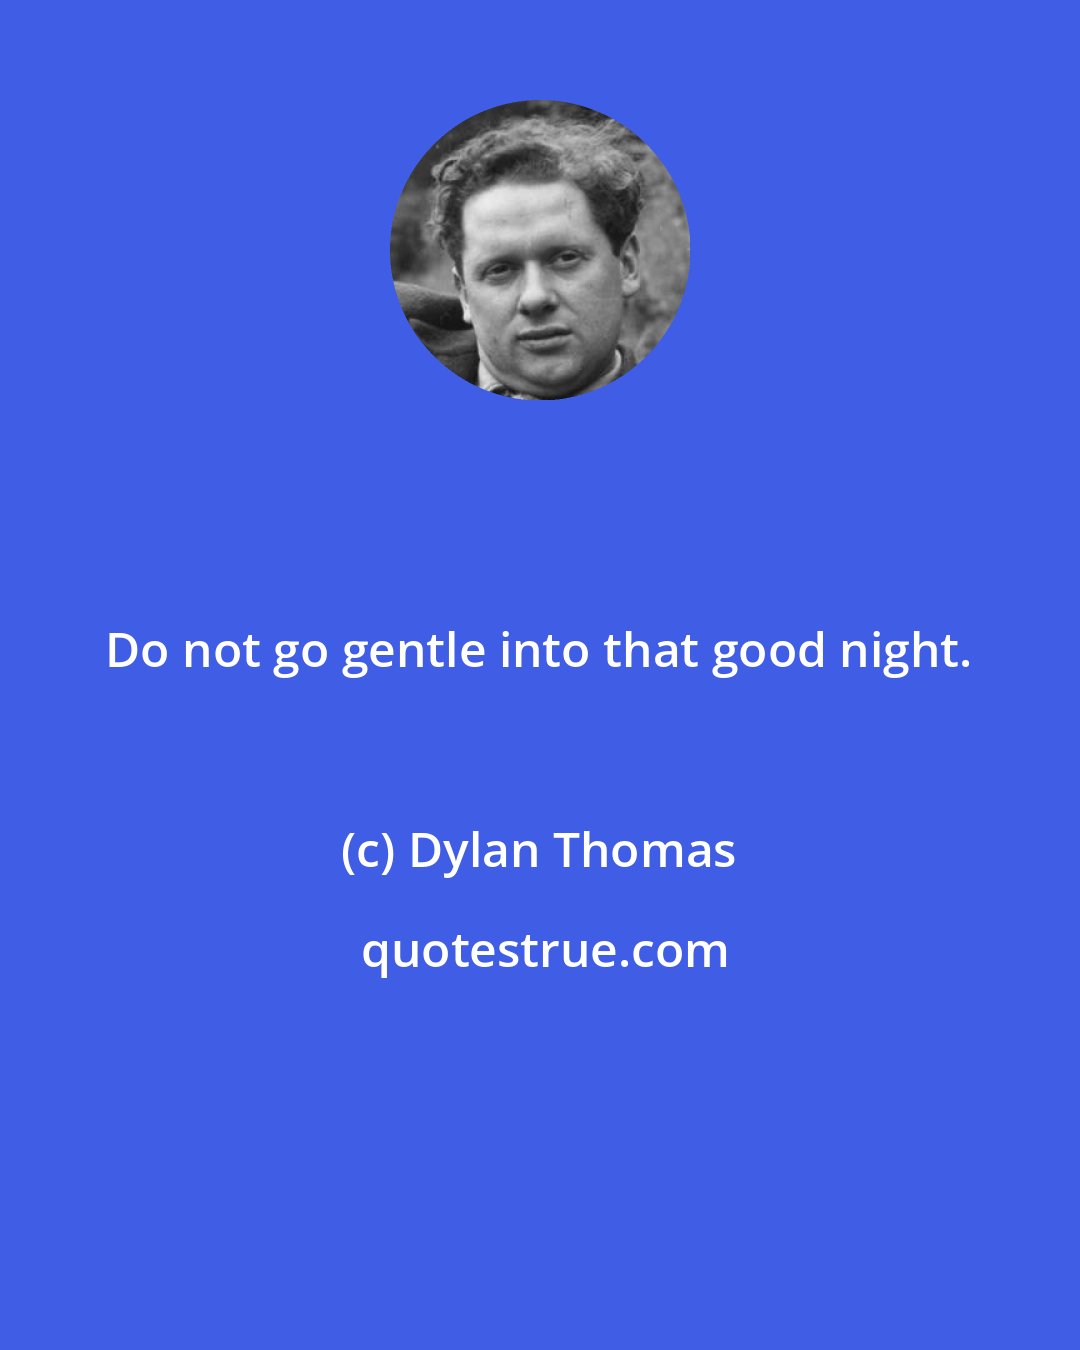 Dylan Thomas: Do not go gentle into that good night.